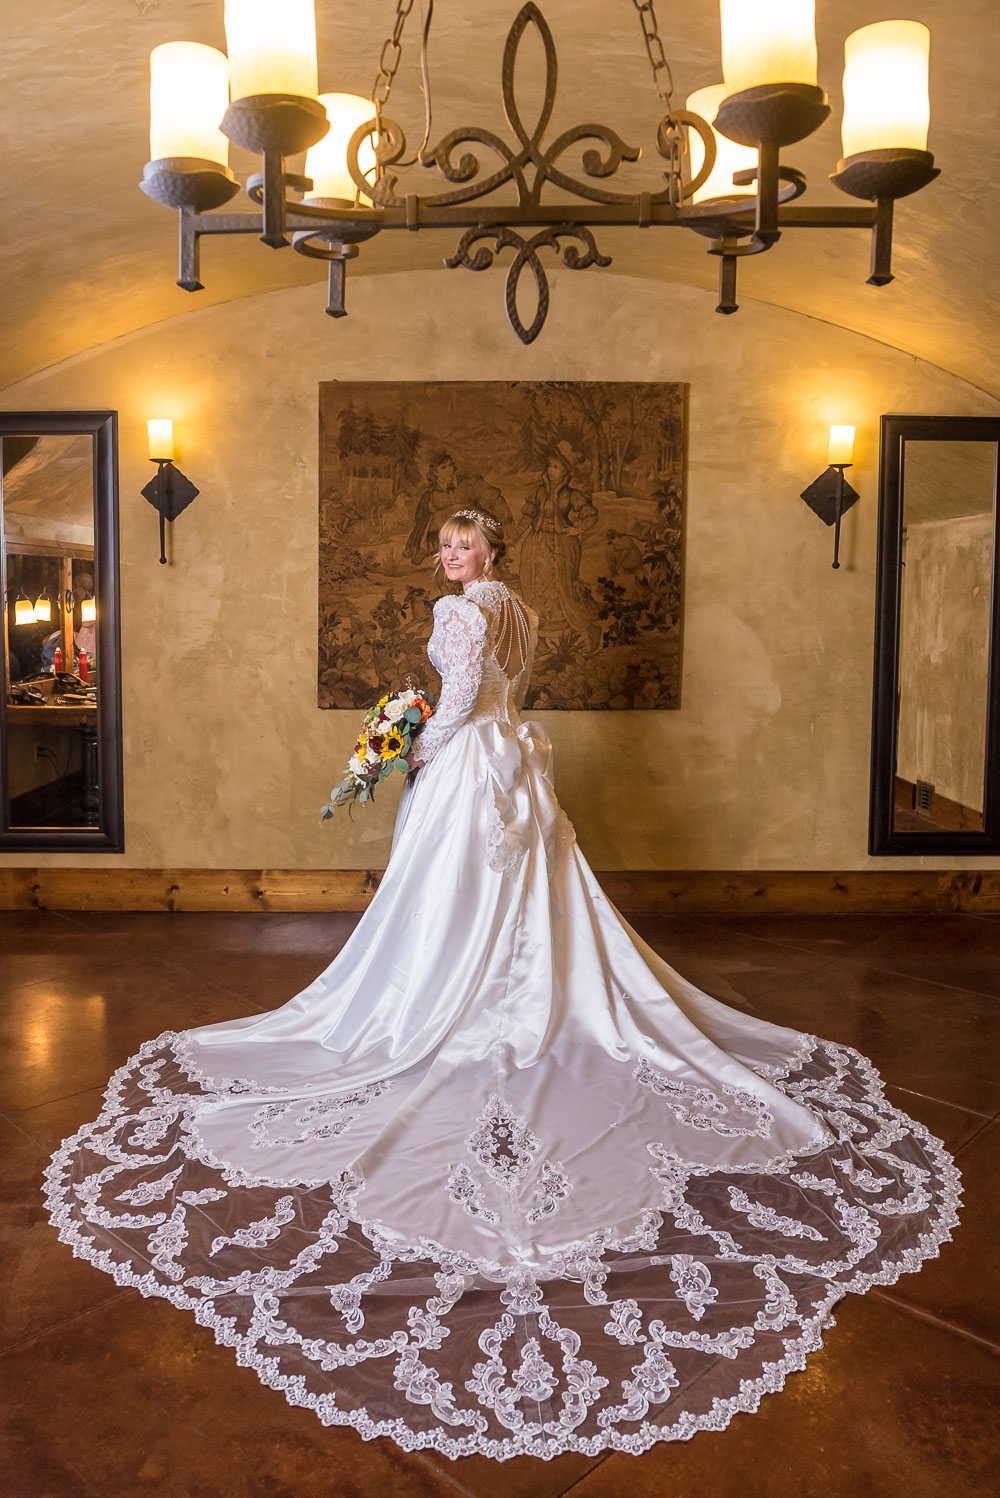 Montaluce Winery Wedding Photos in the dark bridal suite with bride in wedding dress